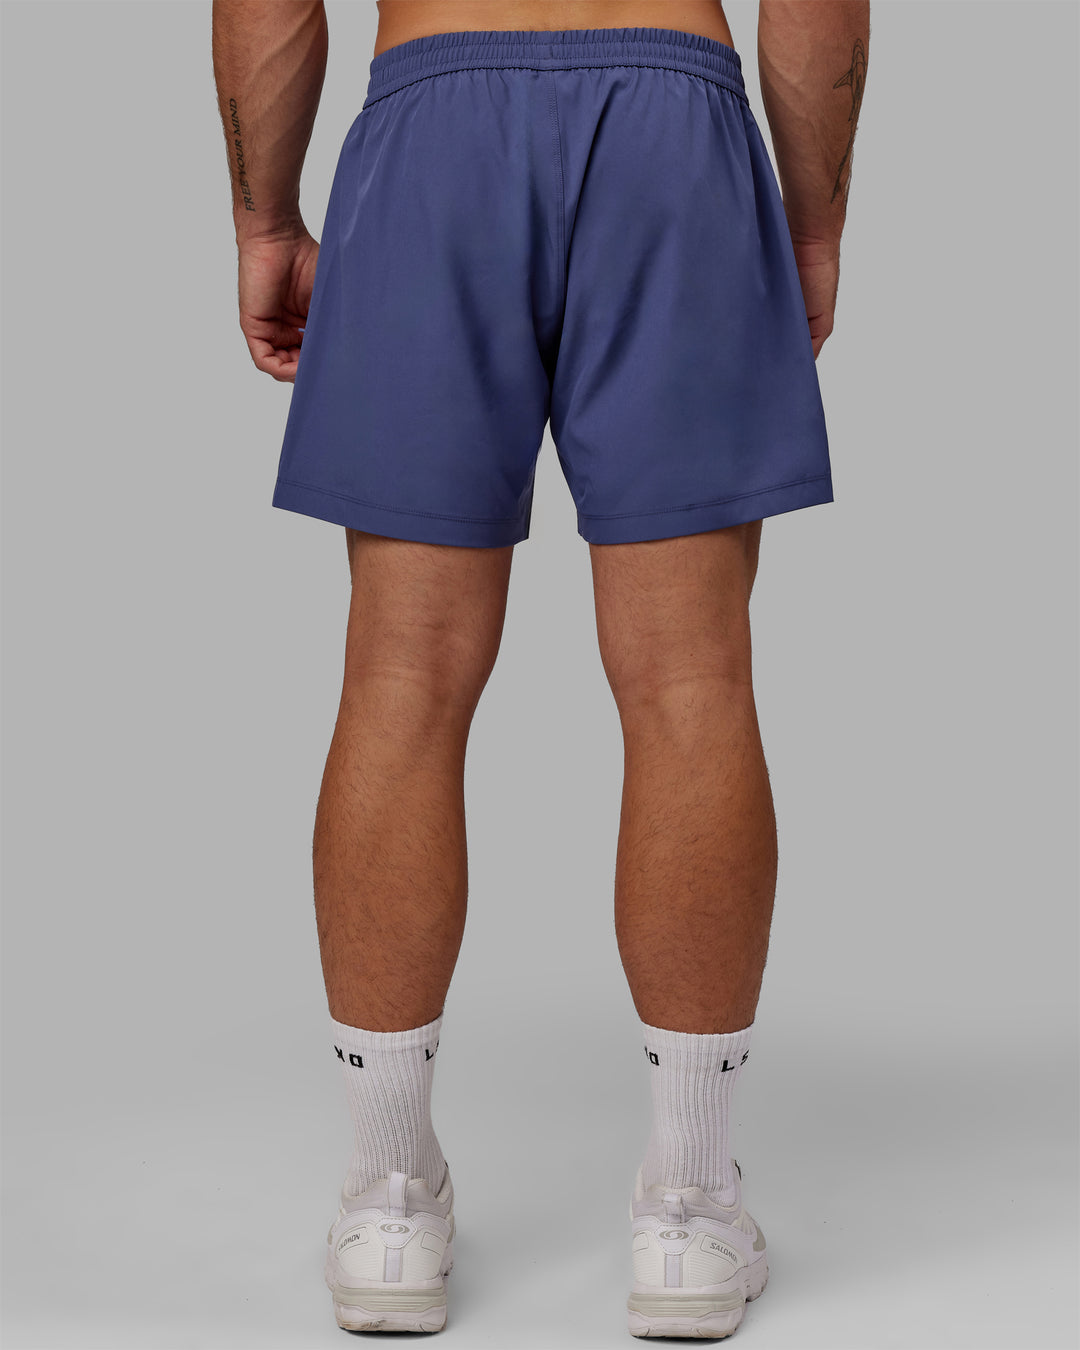 Man wearing Rep 5" Lined Performance Shorts - Future Dusk